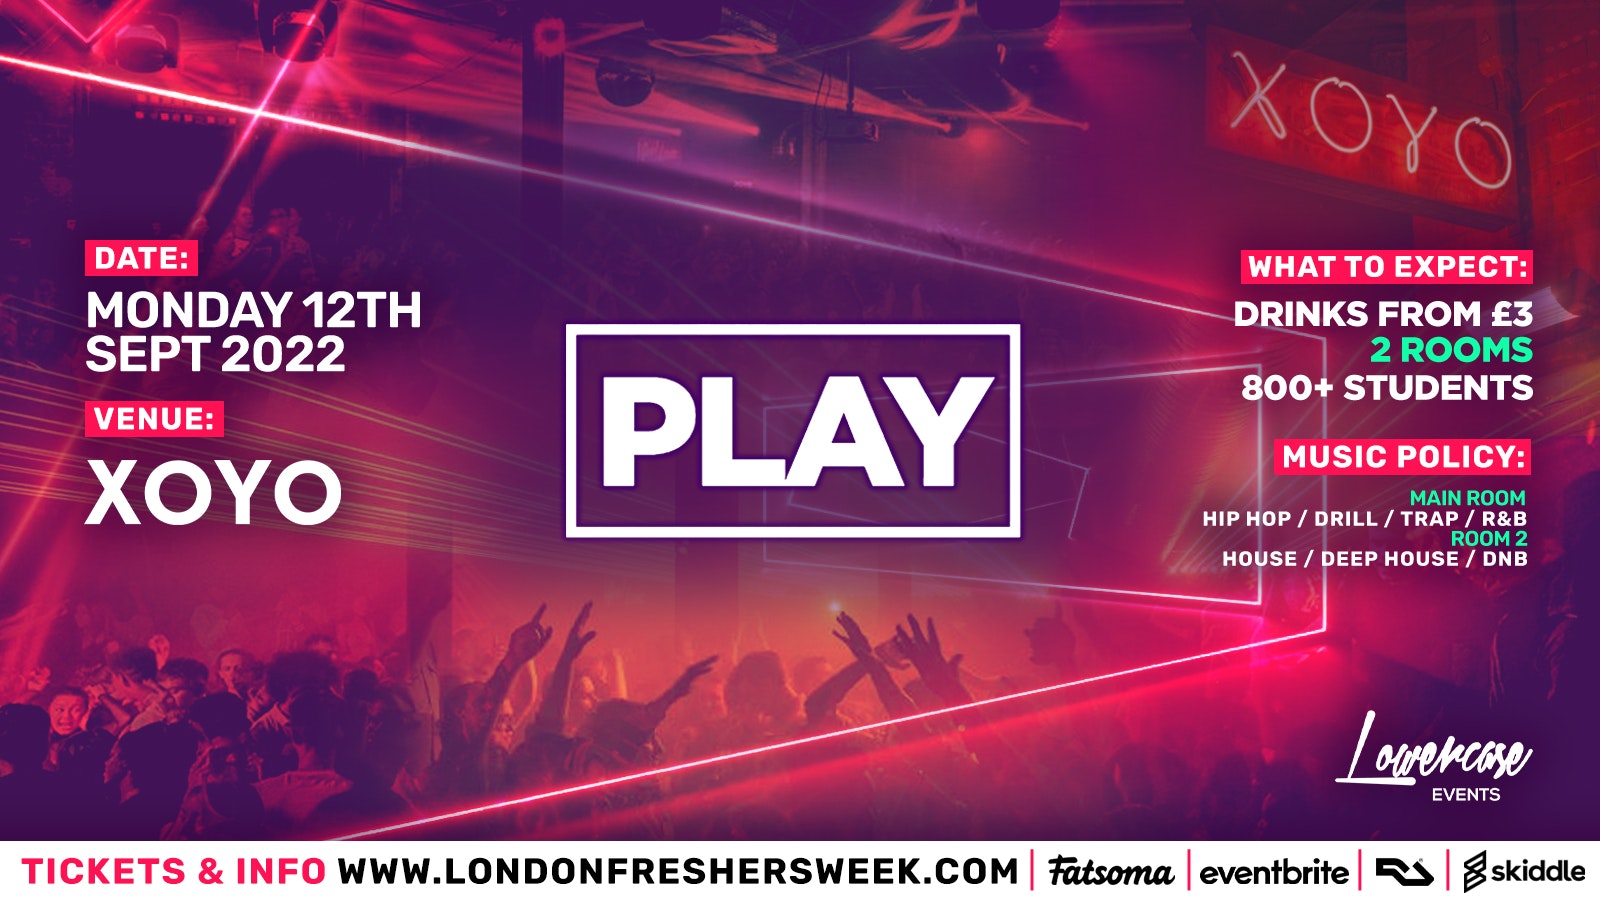 Play @ XOYO – The Biggest Weekly Monday Student Night in London 🔥 London Freshers Week 2022